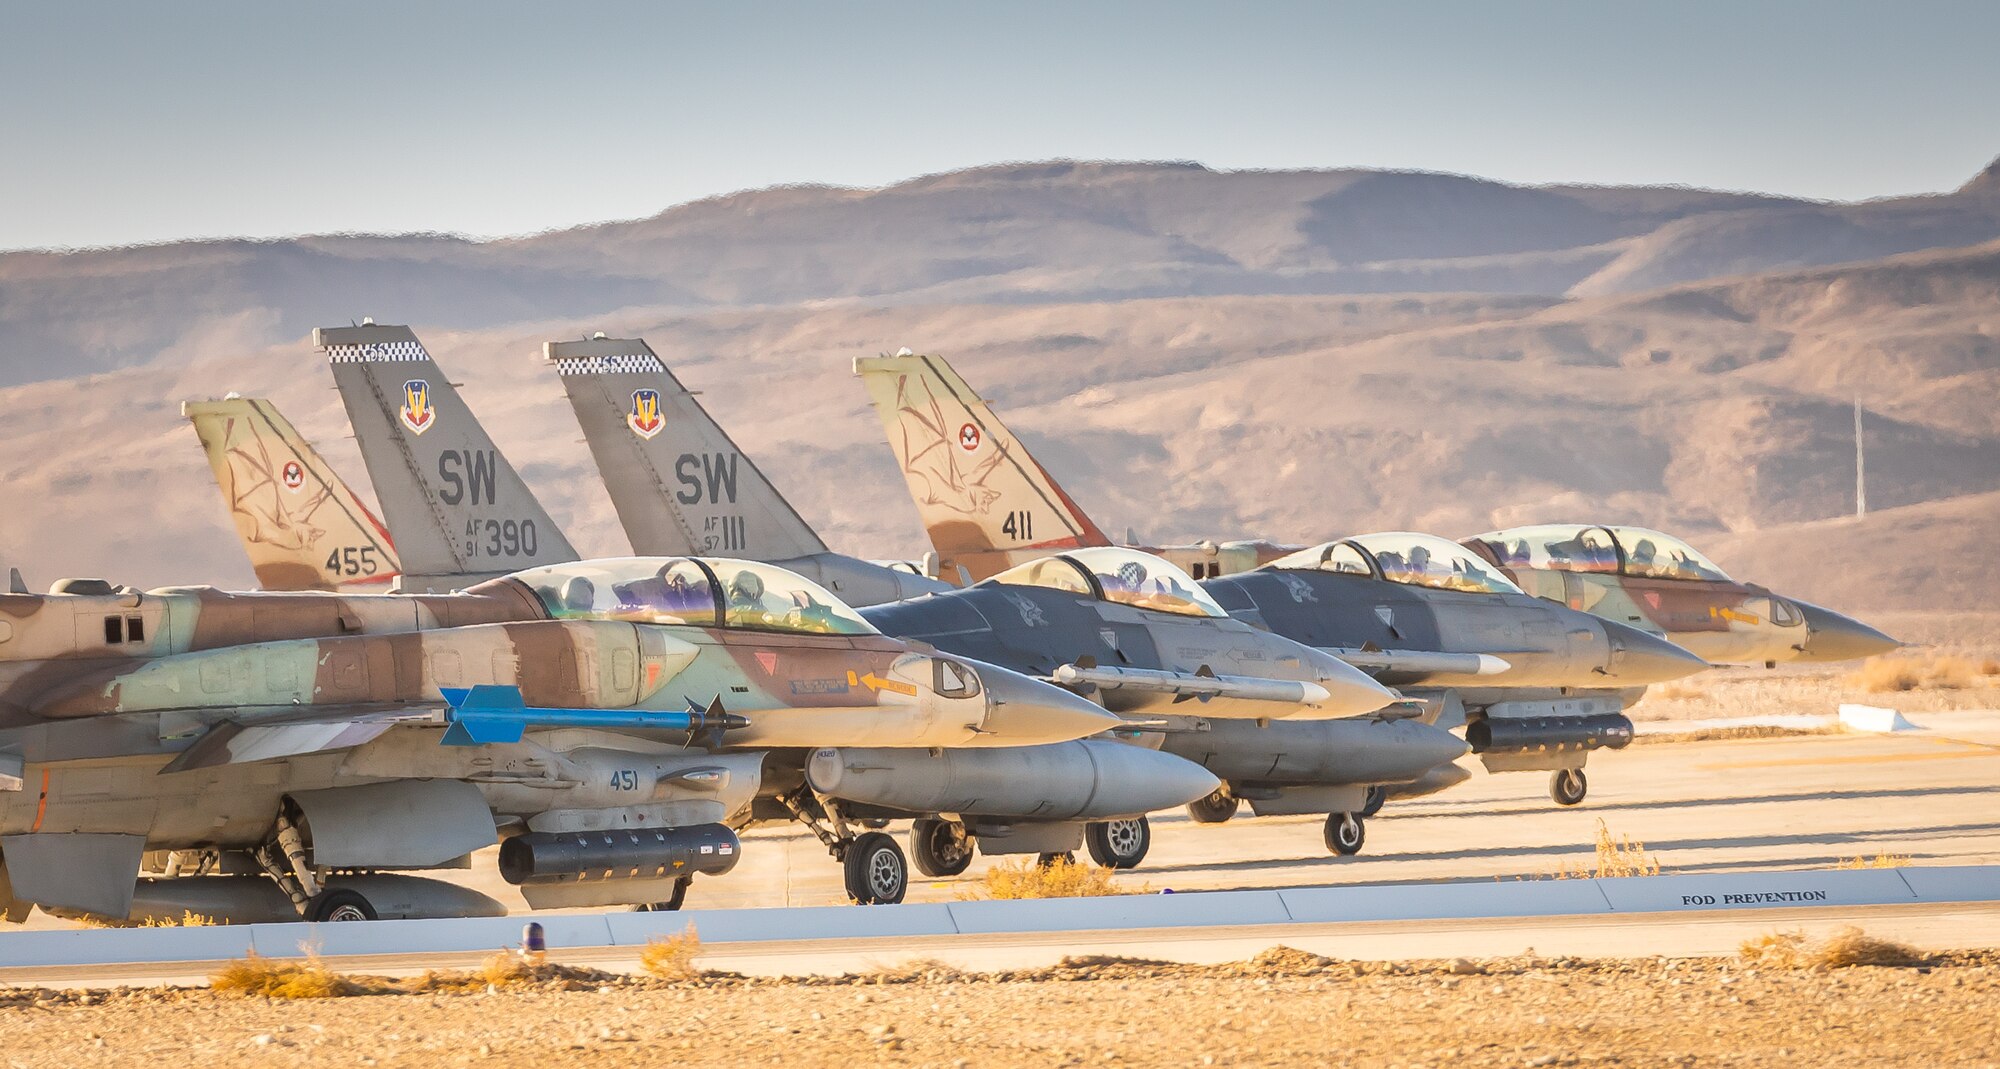 U.S. Air Force pilots from the 55th Expeditionary Fighter Squadron taxi alongside the Israeli Air Force during Desert Falcon in Israel, Jan. 16, 2022. During Desert Falcon, Israeli and U.S aircrews flew wing-to-wing and trained for various aerial scenarios and strikes. (Courtesy photo by the Israeli Air Force)